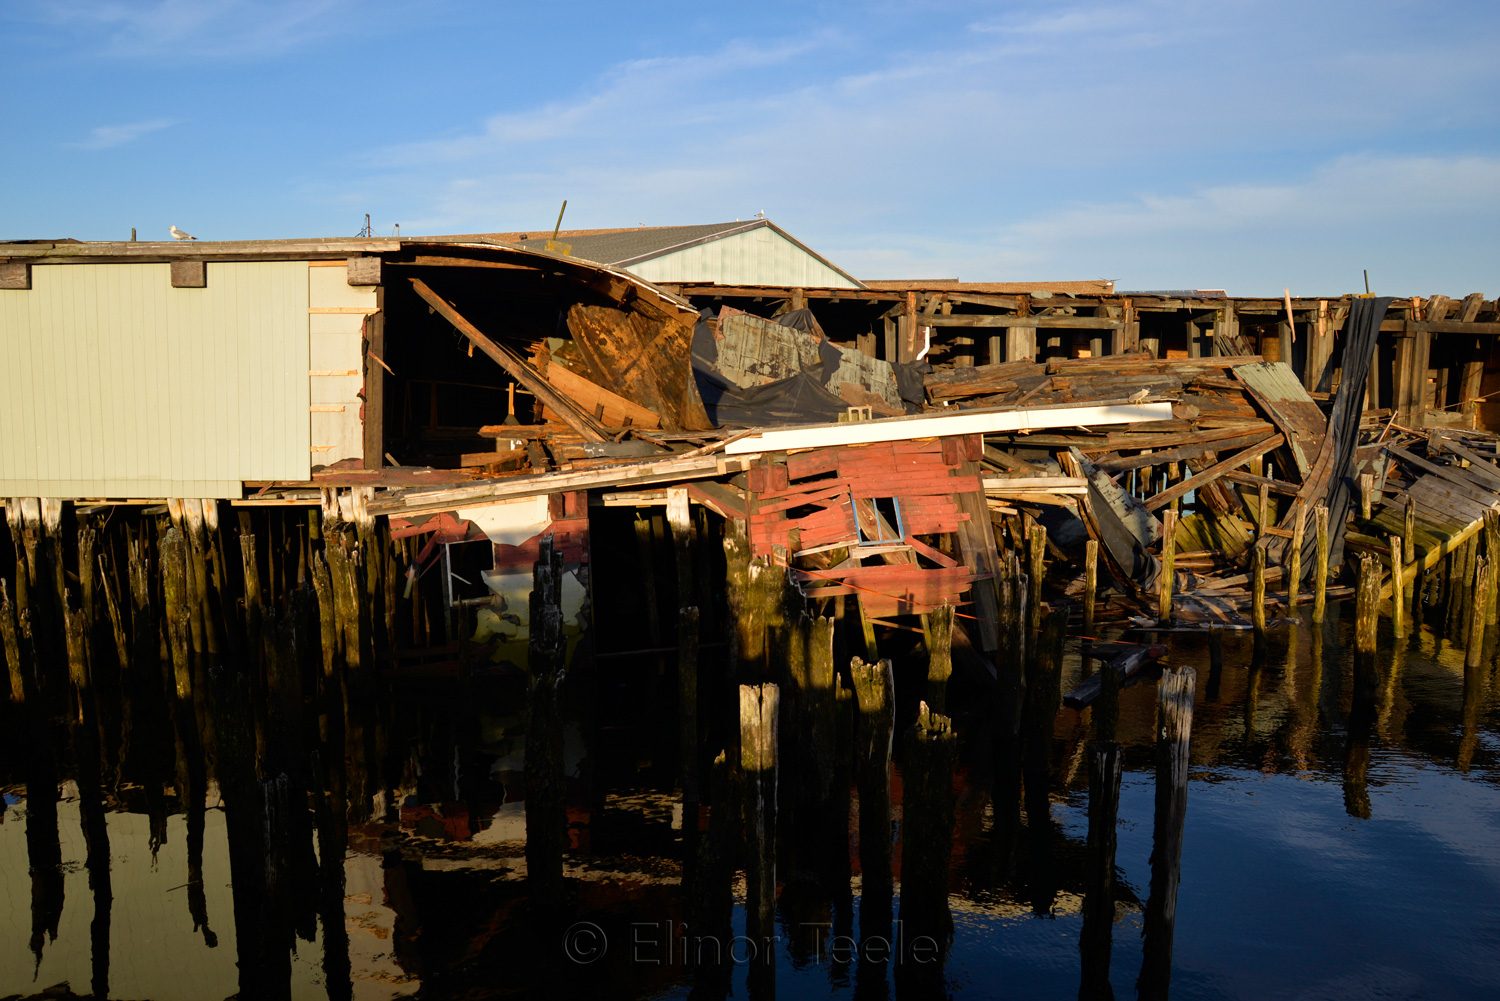 Gloucester Waterfront - Collapsed Warehouse 1